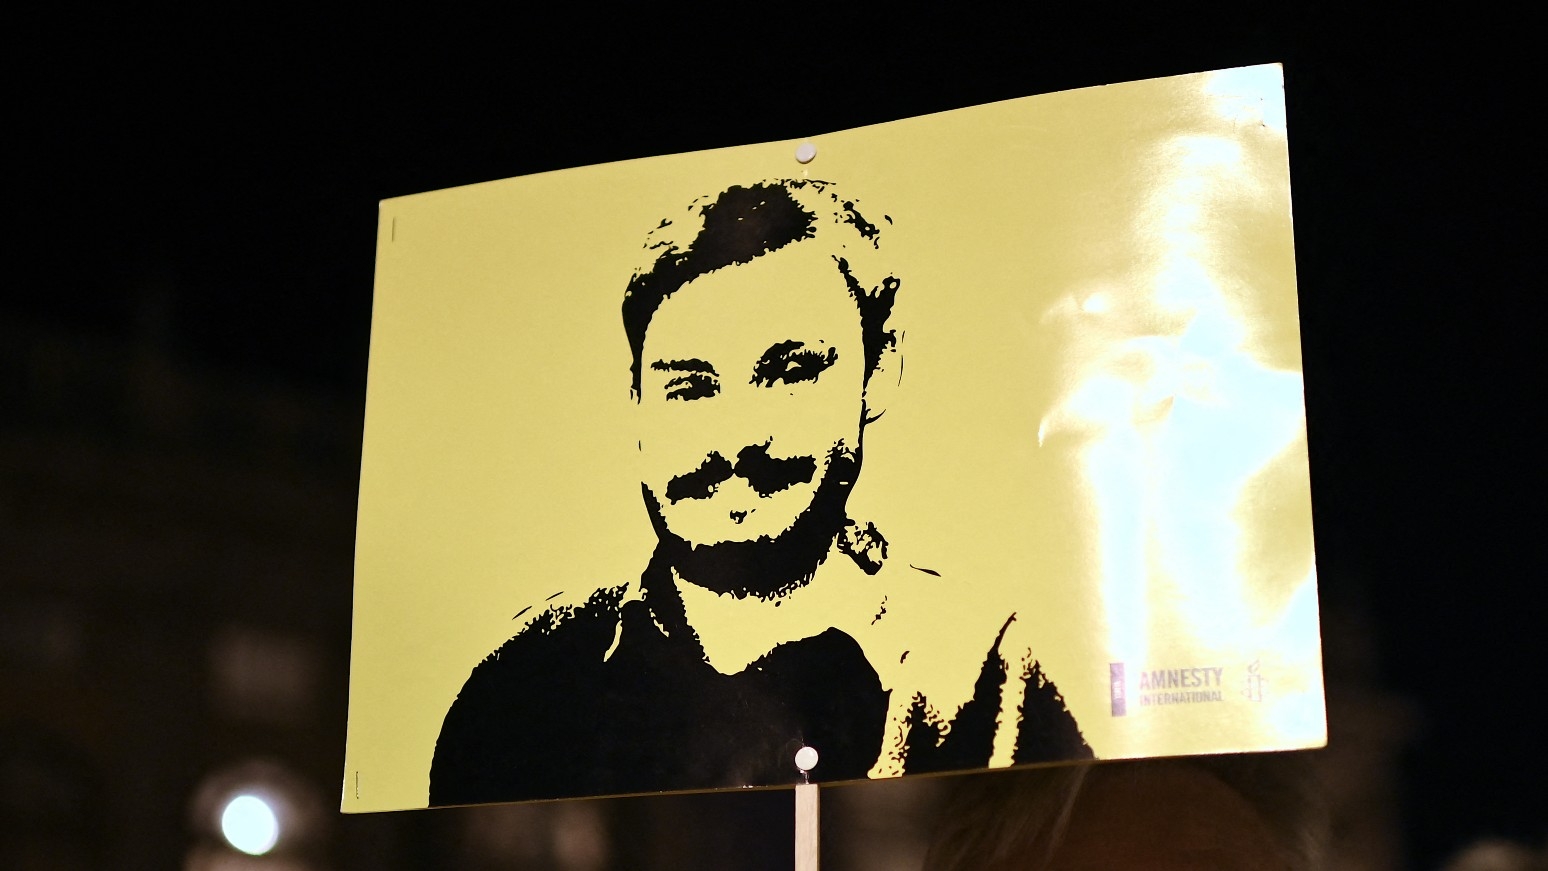 Regeni, a doctoral candidate at Cambridge University who was researching independent trade unions in Egypt, was discovered dead in January 2016.